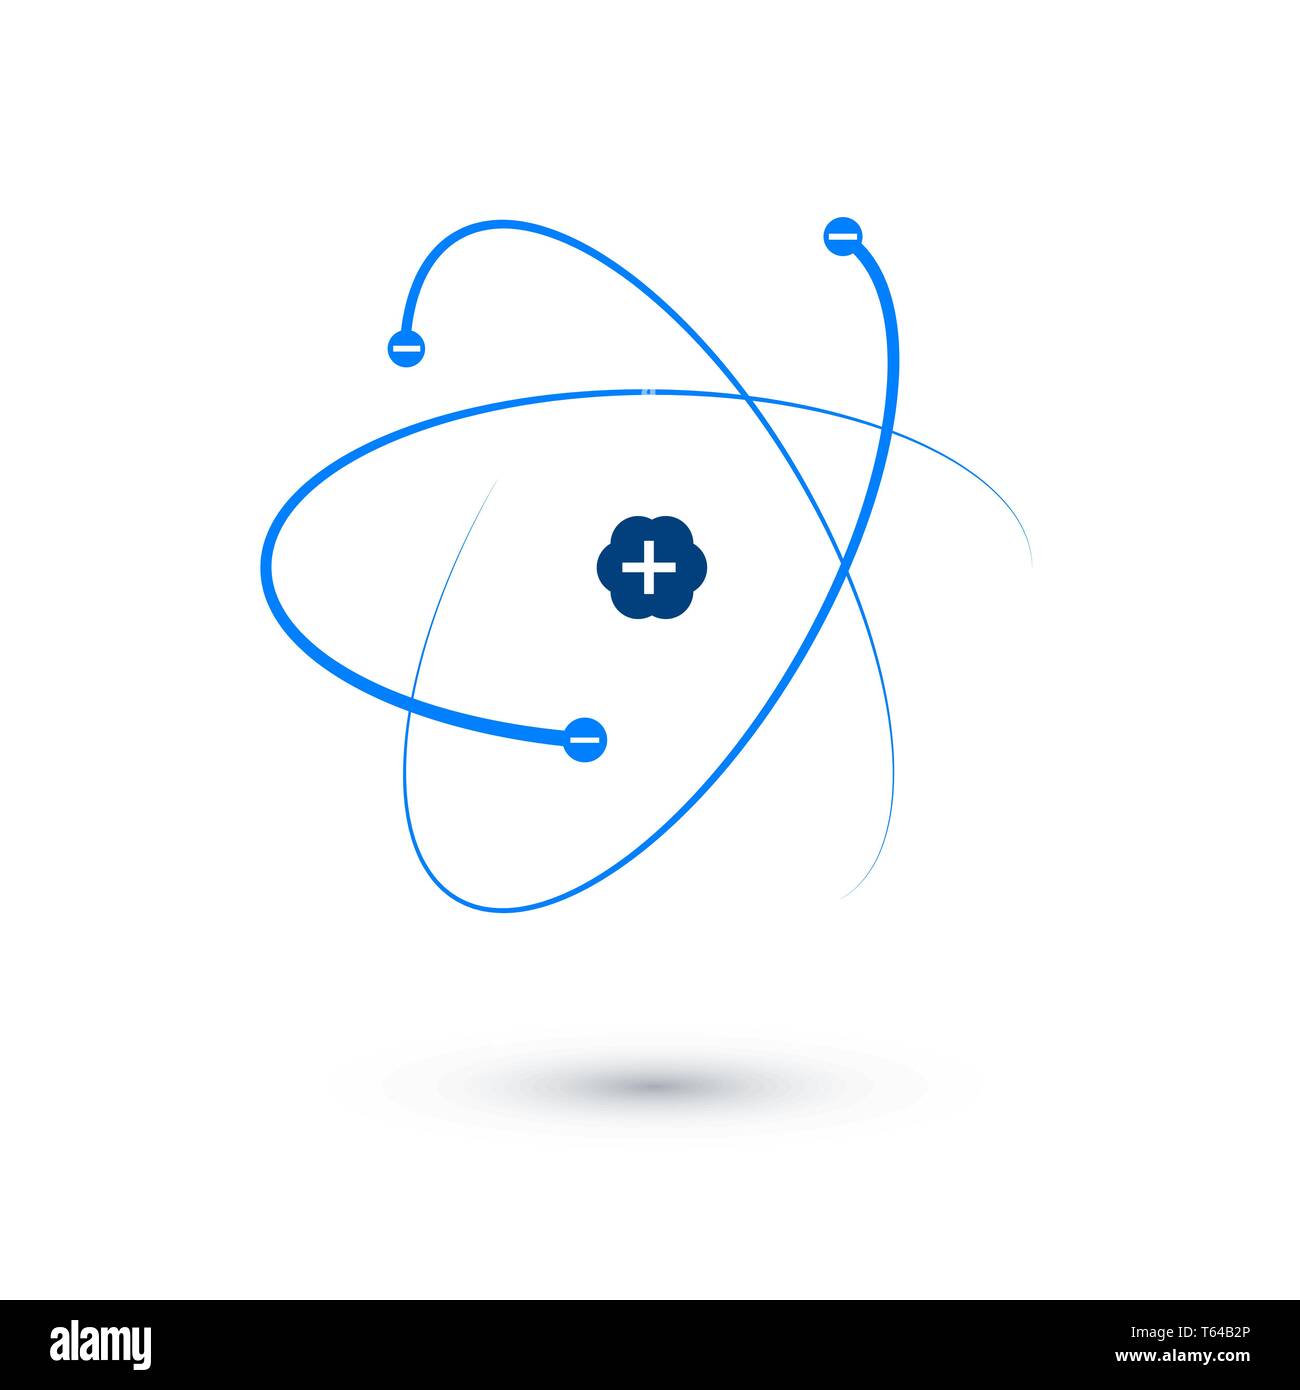 Atom structure. Blue atom icon. vector illustration isolated on white background Stock Vector